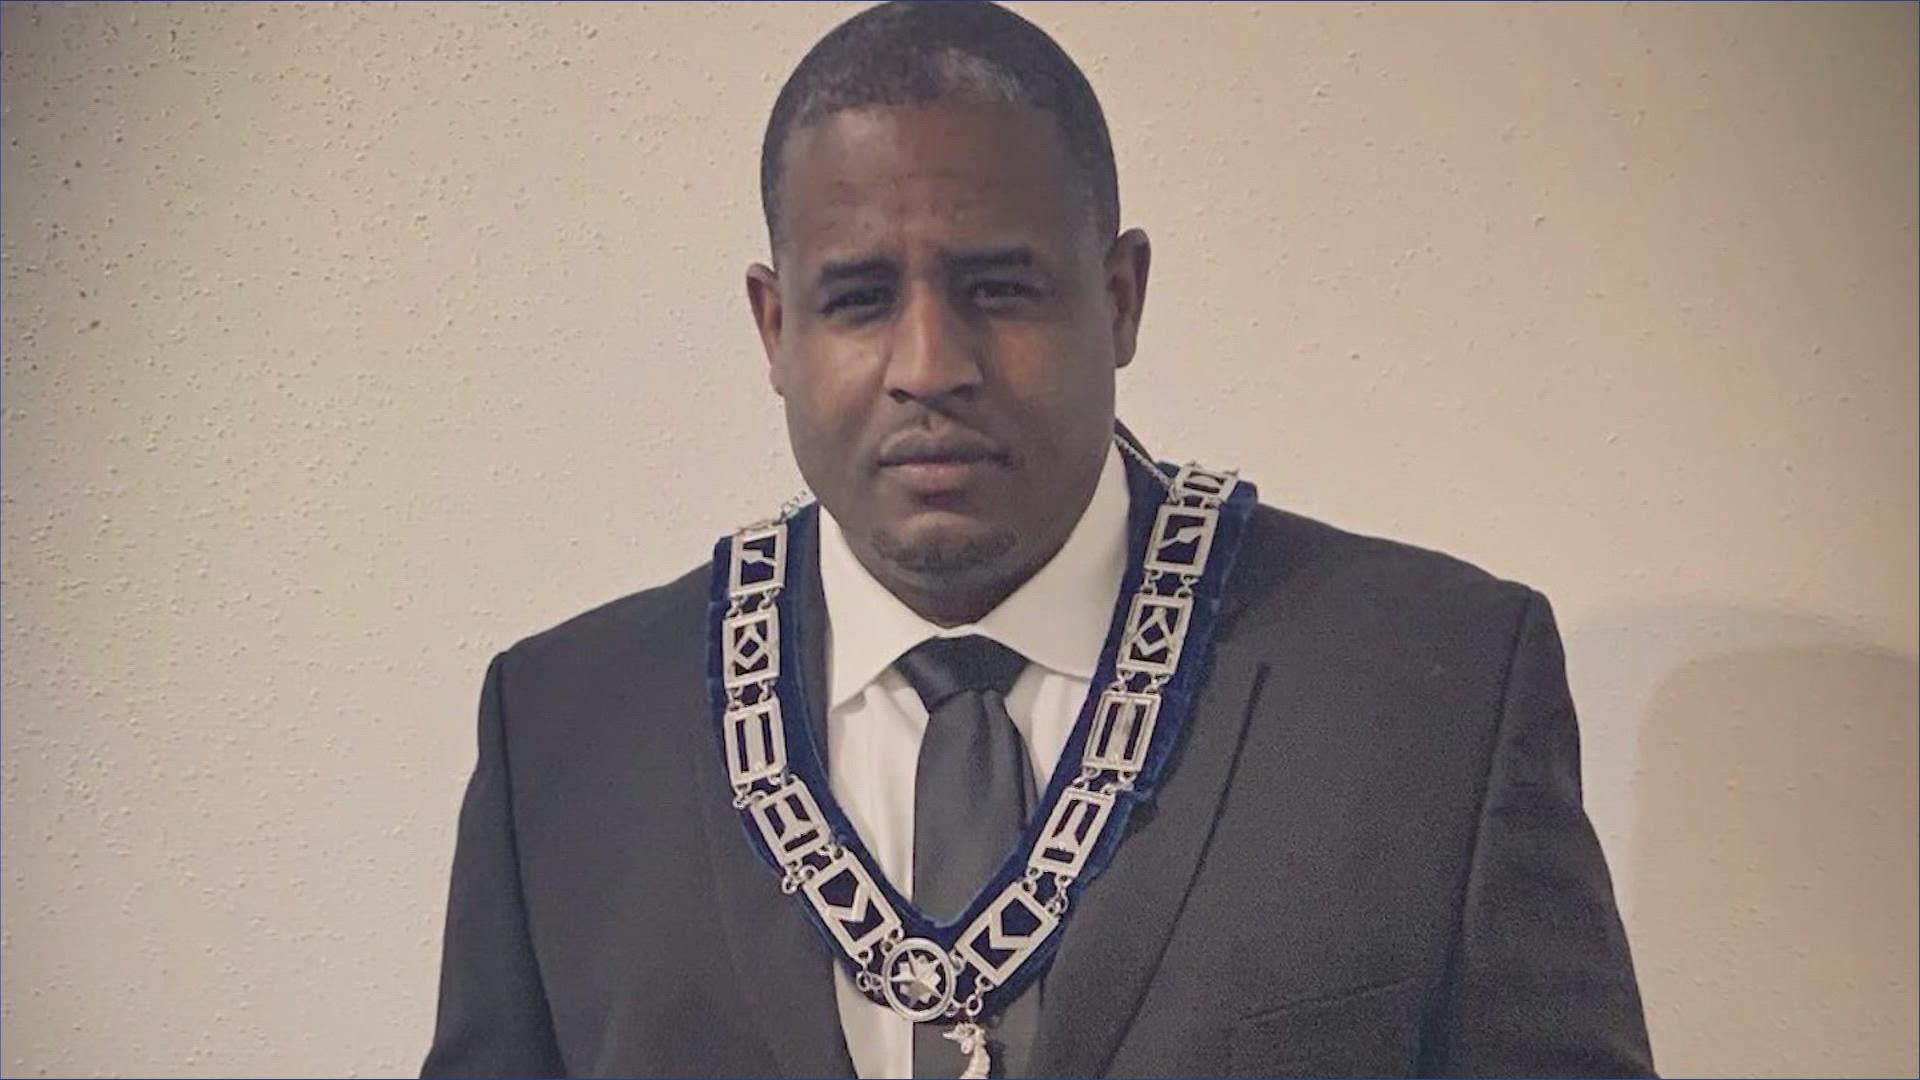 Houston police are still searching for the shooter who gunned down off-duty New Orleans Police Detective Everett Briscoe.